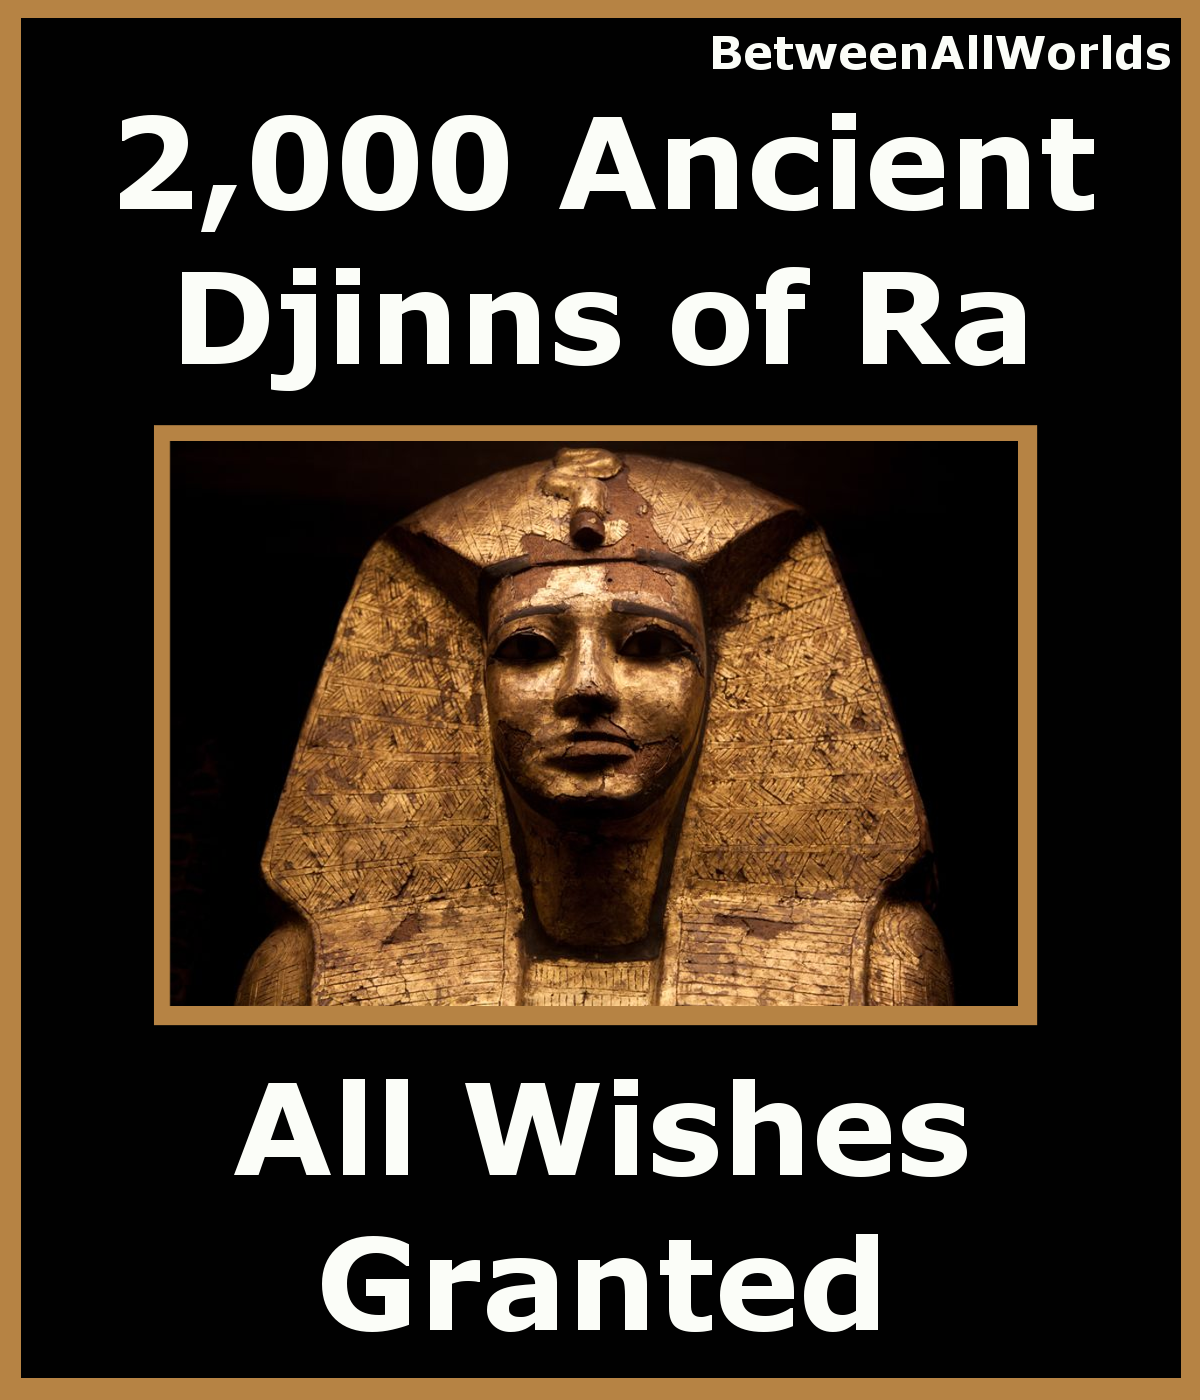 Primary image for zblv spr 2,000 Djinns Of Ra The SunGod All Wishes Granted Betwenallworlds Ritual